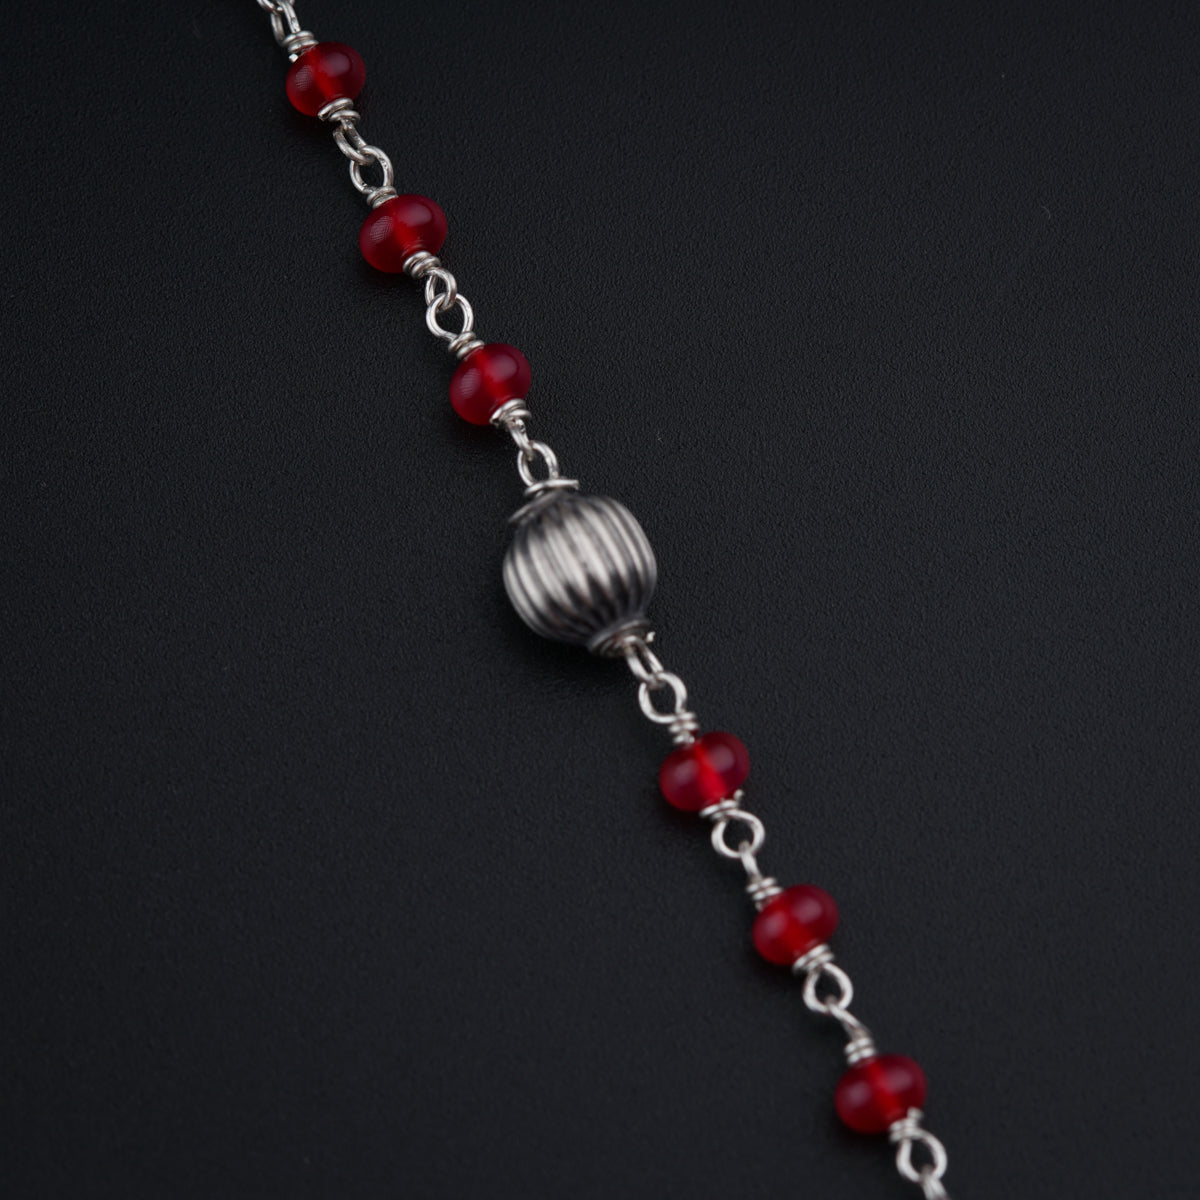 a red beaded bracelet on a black surface